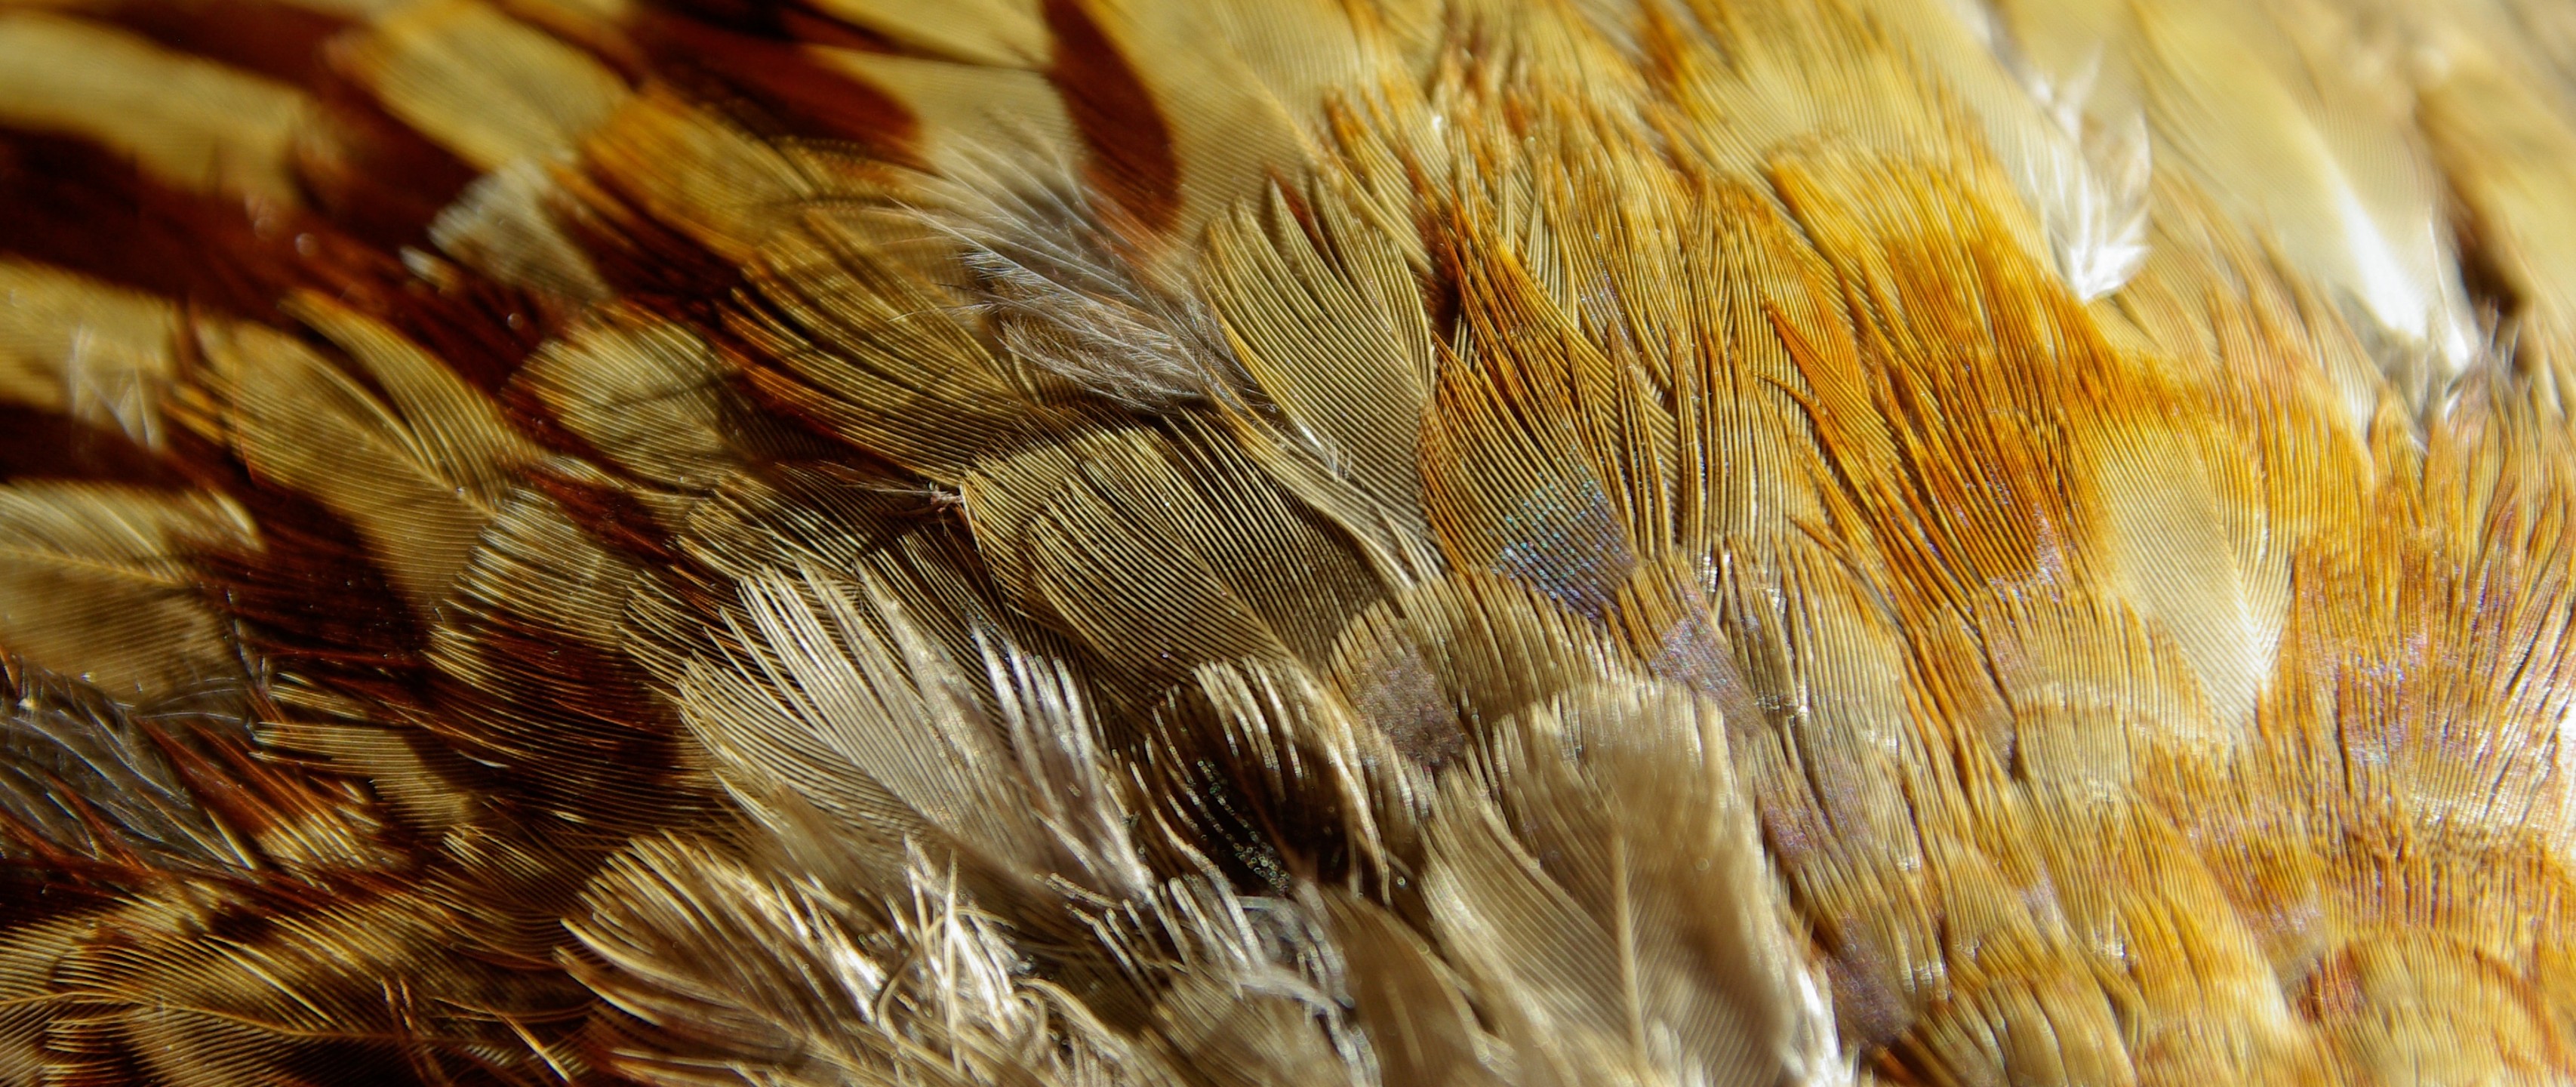 Download 3413x1440 Feathers Wallpaper